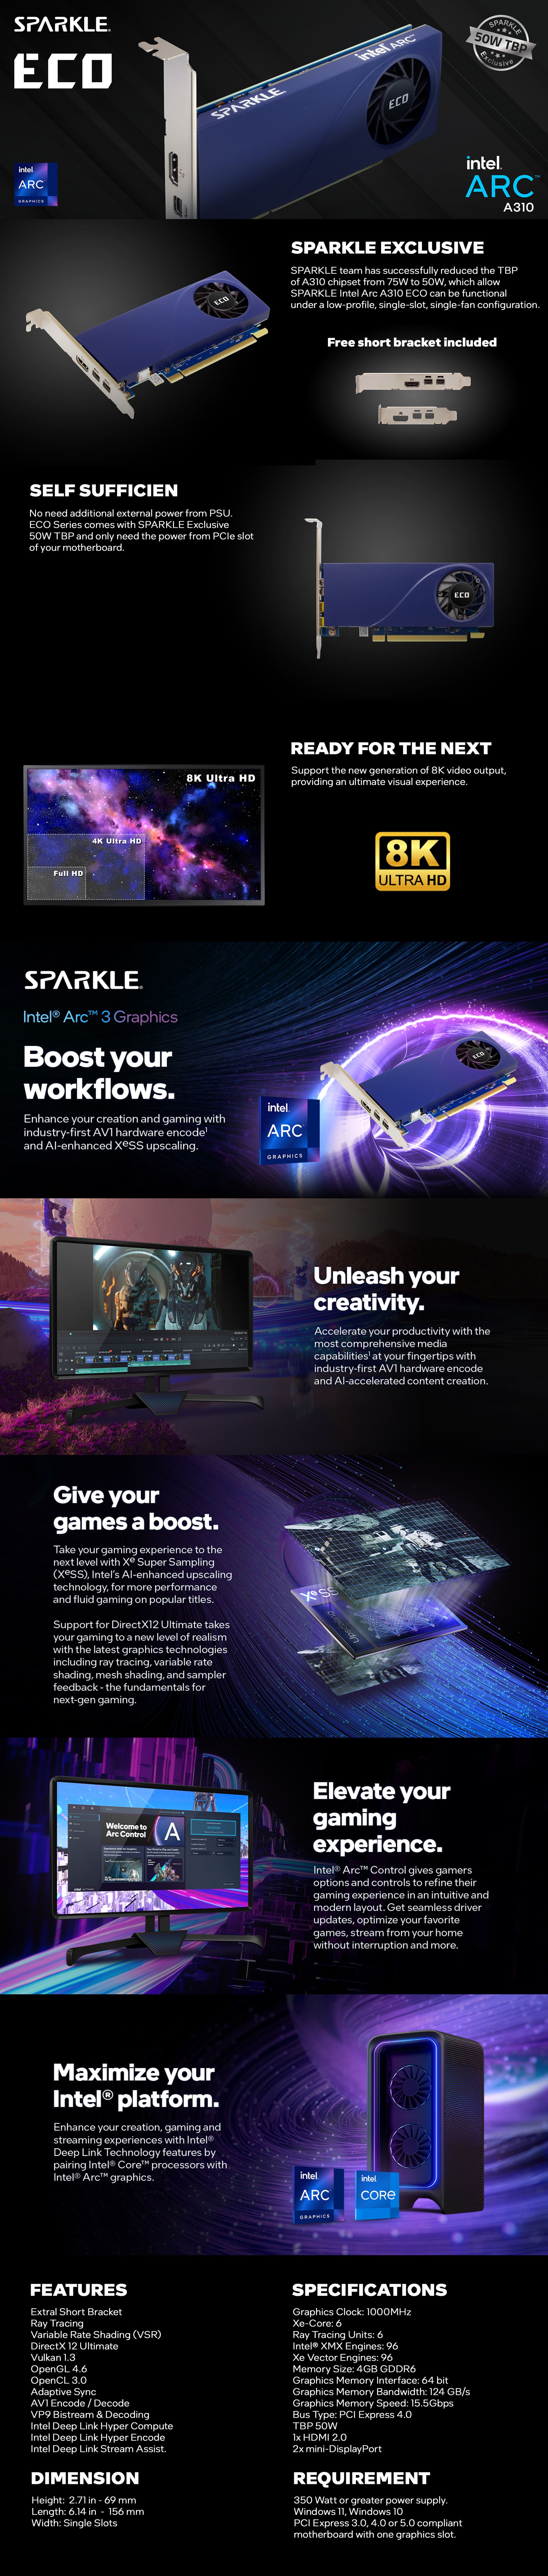 A large marketing image providing additional information about the product SPARKLE Intel Arc A310 ECO 4GB GDDR6 - Additional alt info not provided